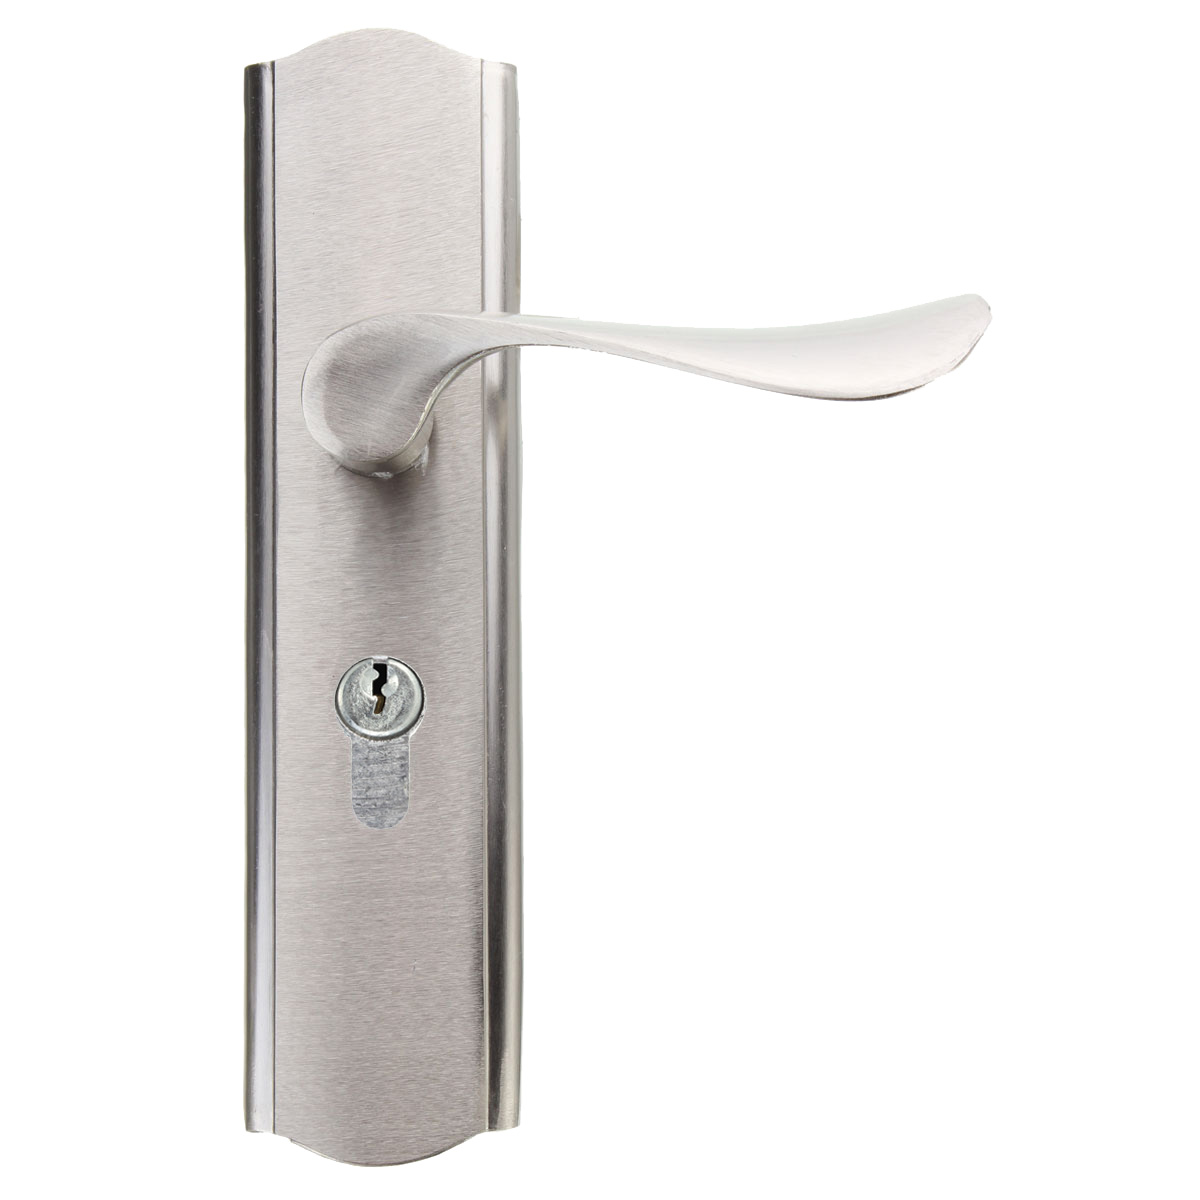 Polished-Door-Handle-Front-Back-Lever-Lock-Cylinder-Dual-Latch-with-Keys-1022997